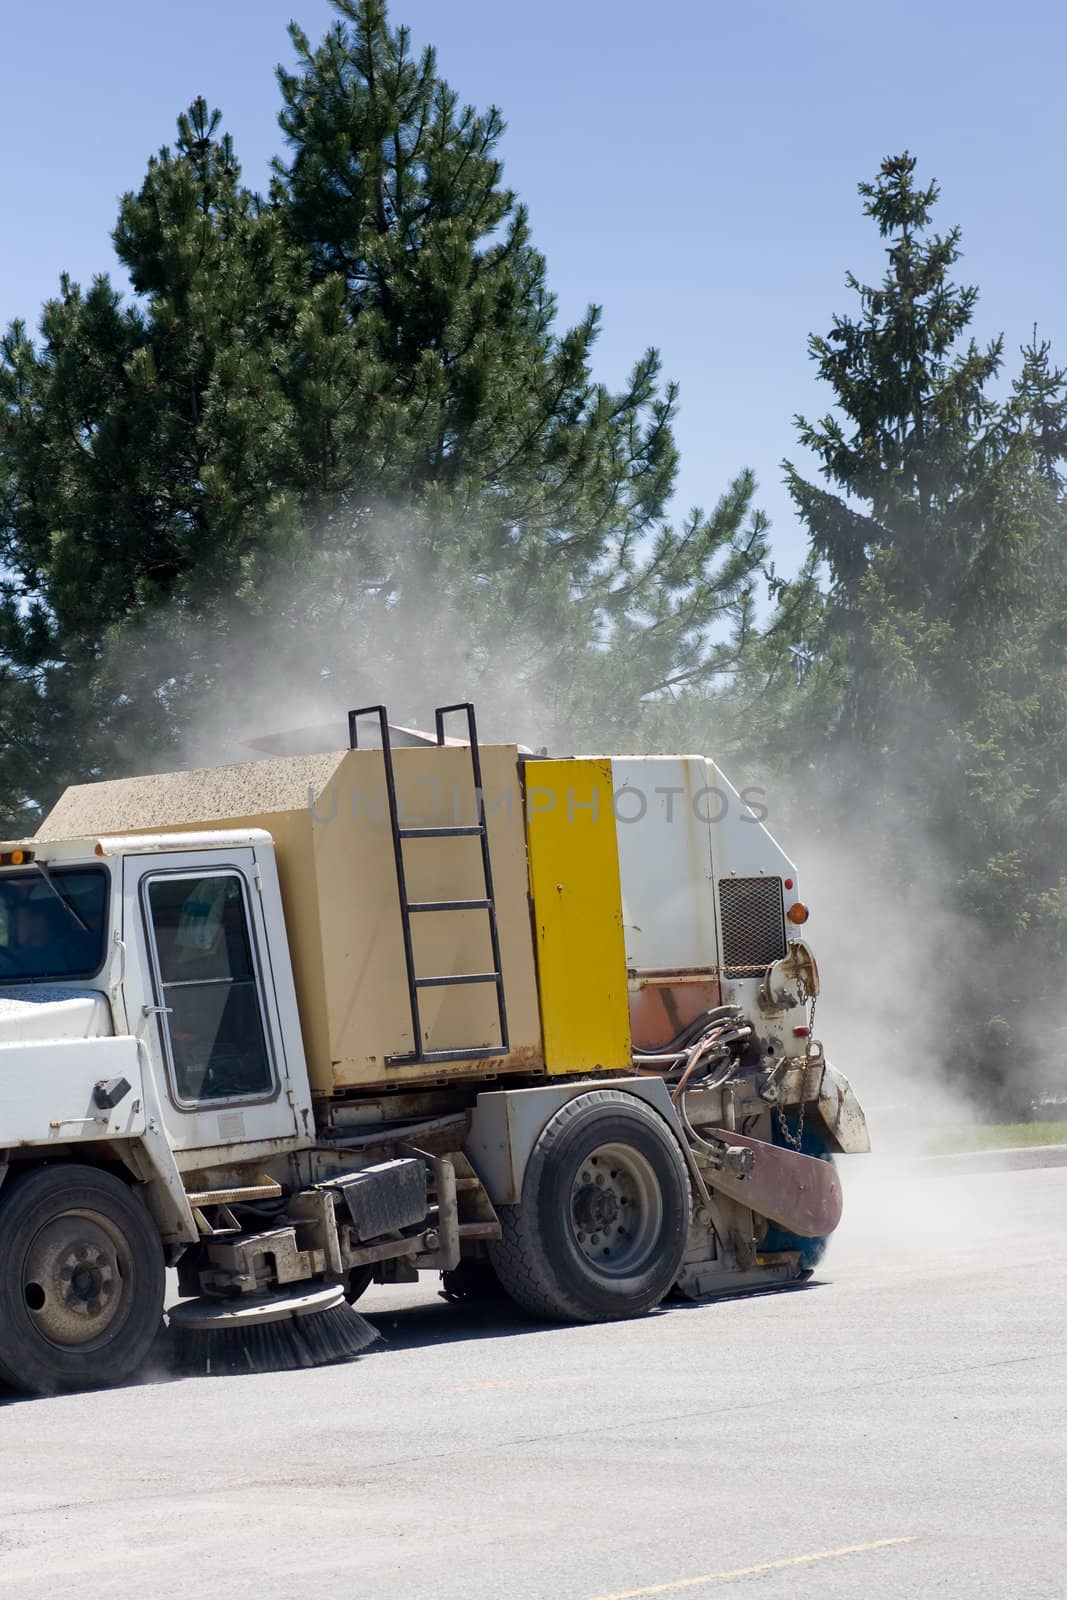 A street sweeper truck cleaning a parking lot with a dust cloud behind.